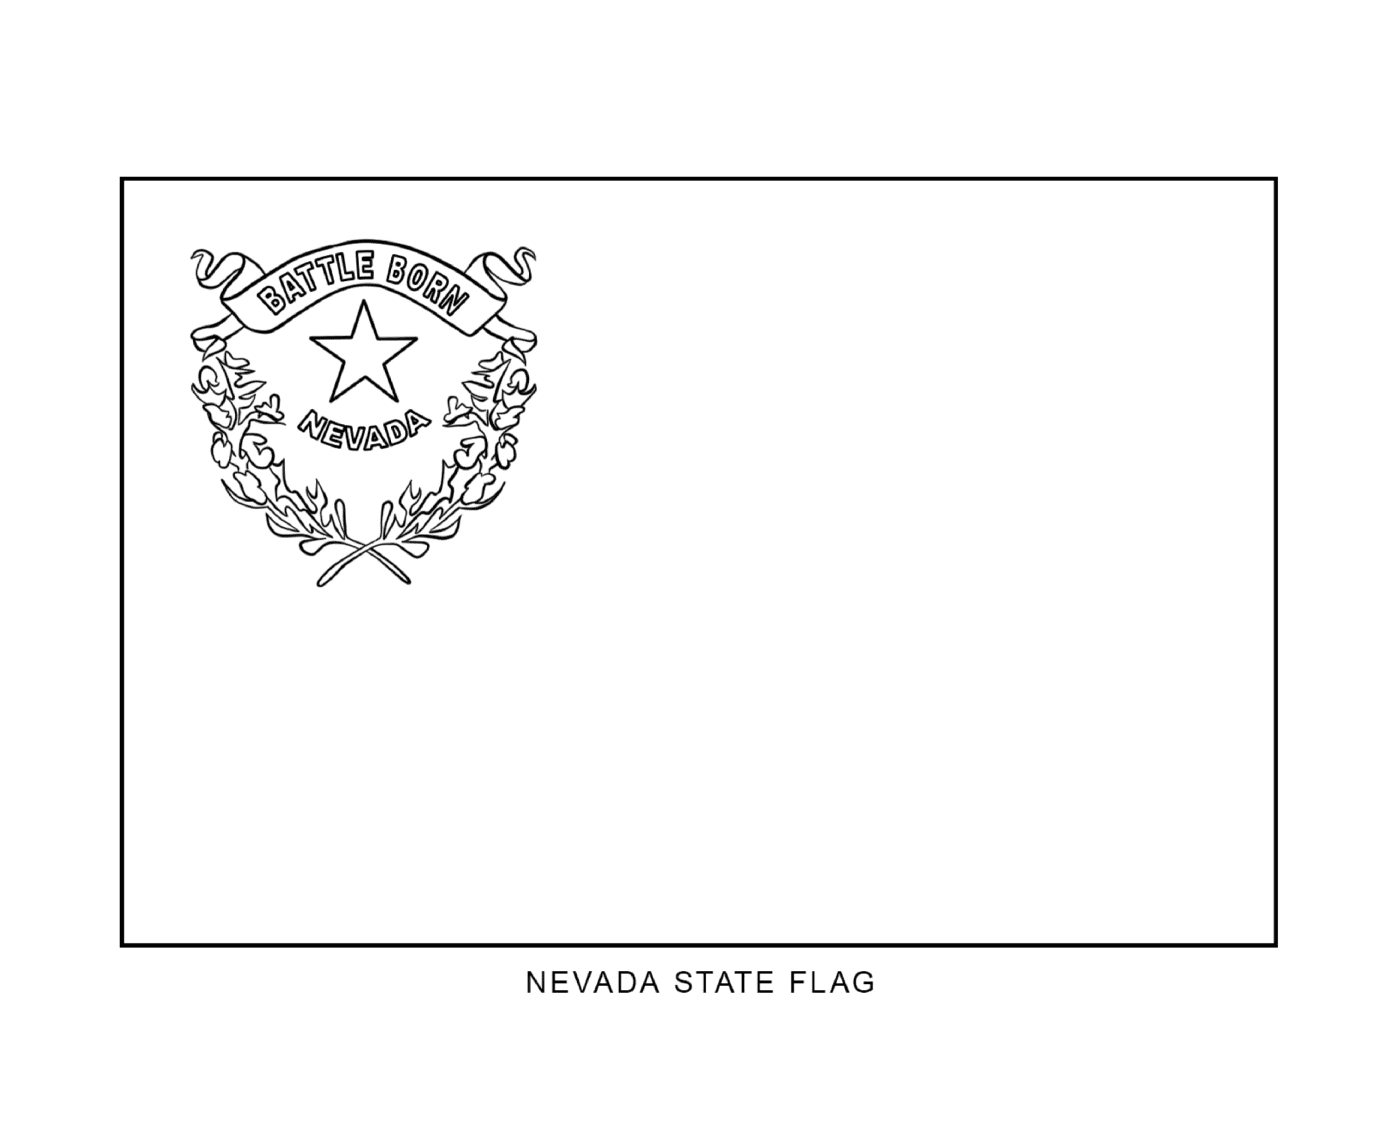  Flag of the State of Nevada drawn 